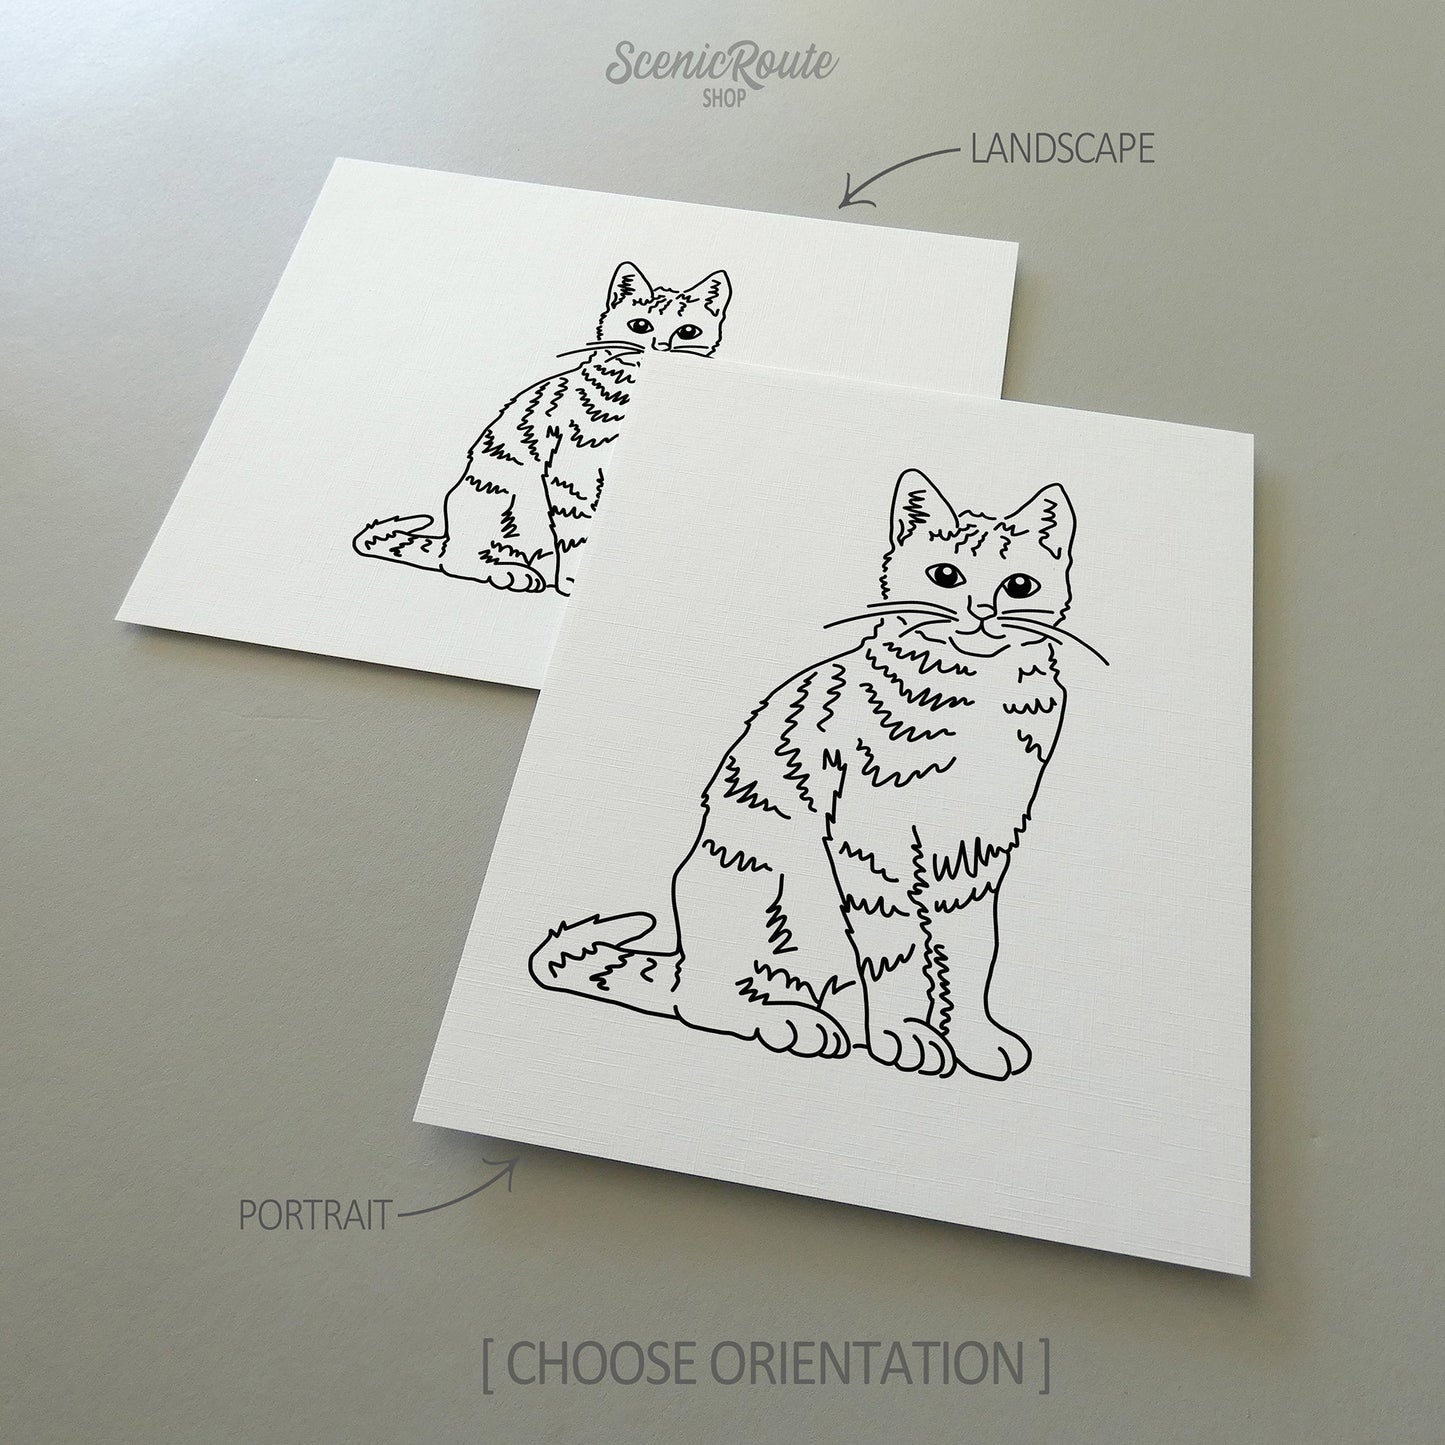 Two line art drawings of a Tabby Cat on white linen paper with a gray background.  The pieces are shown in portrait and landscape orientation for the available art print options.